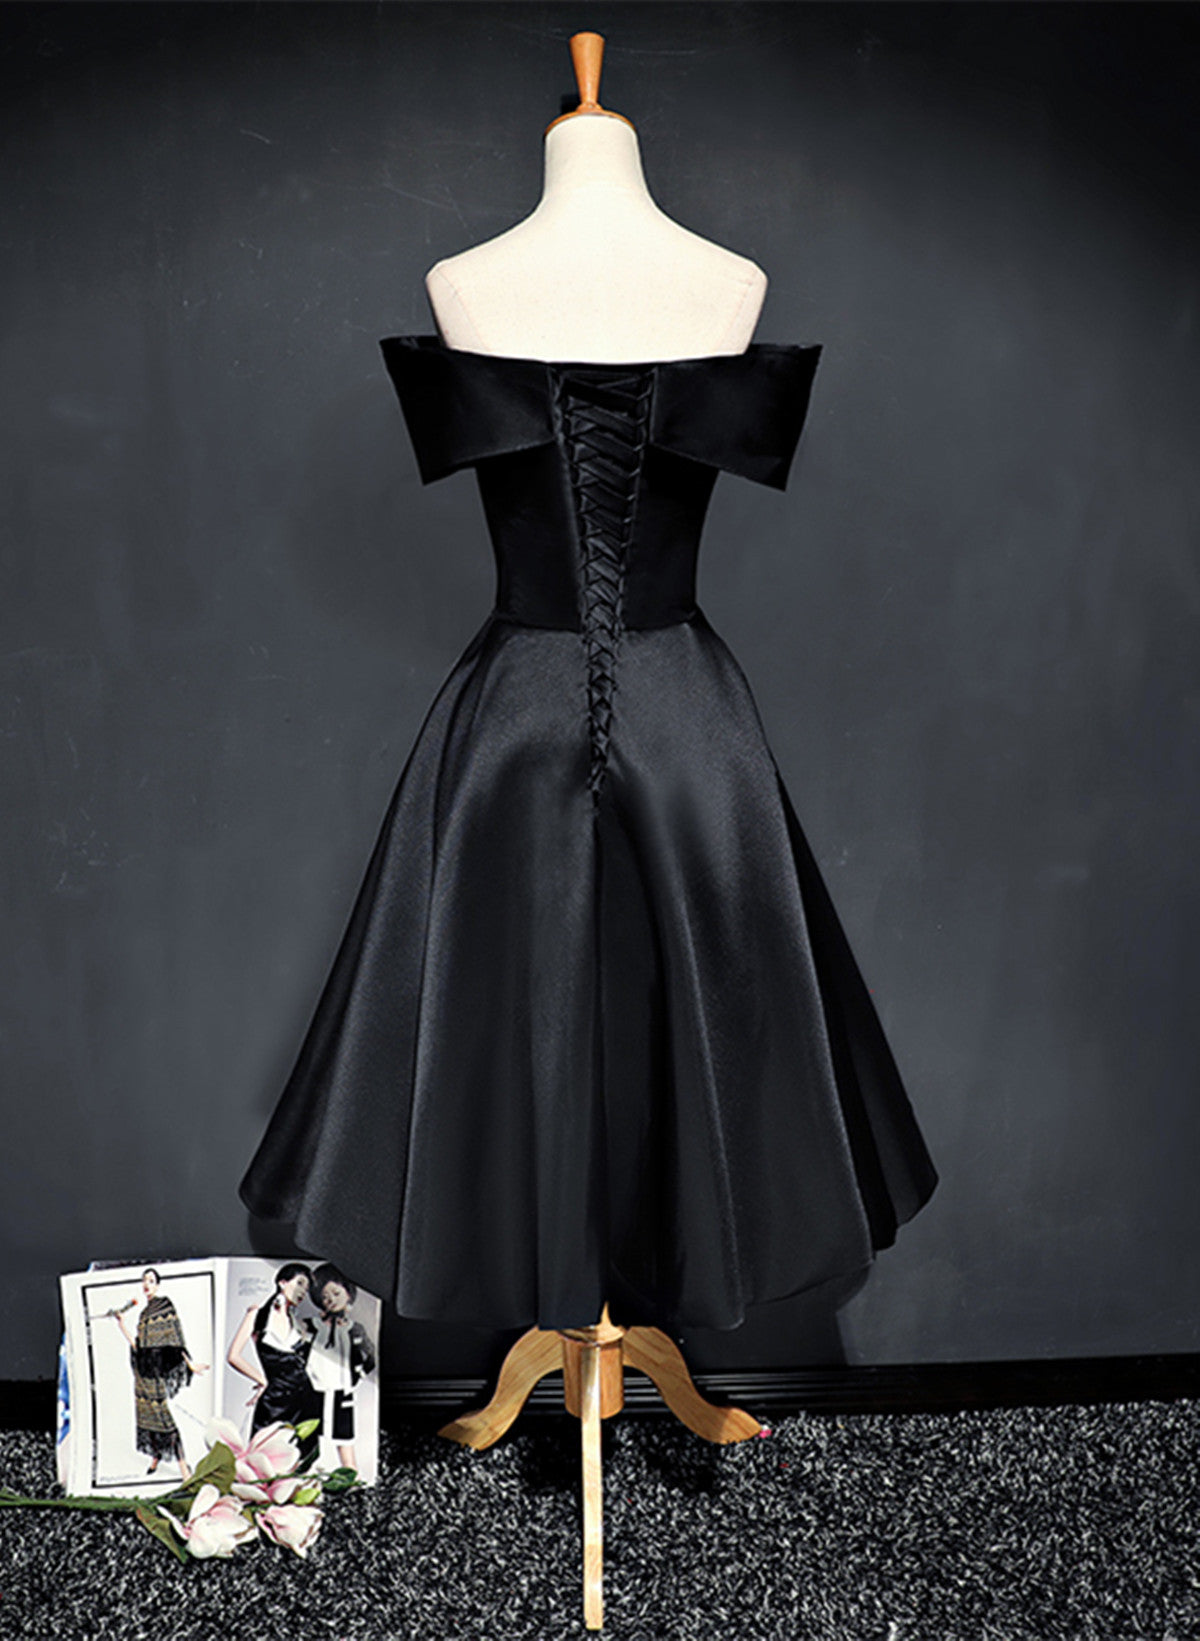 Black Knee Length Satin with Flowers Party Dress, Black Short Prom Dress Homecoming Dress